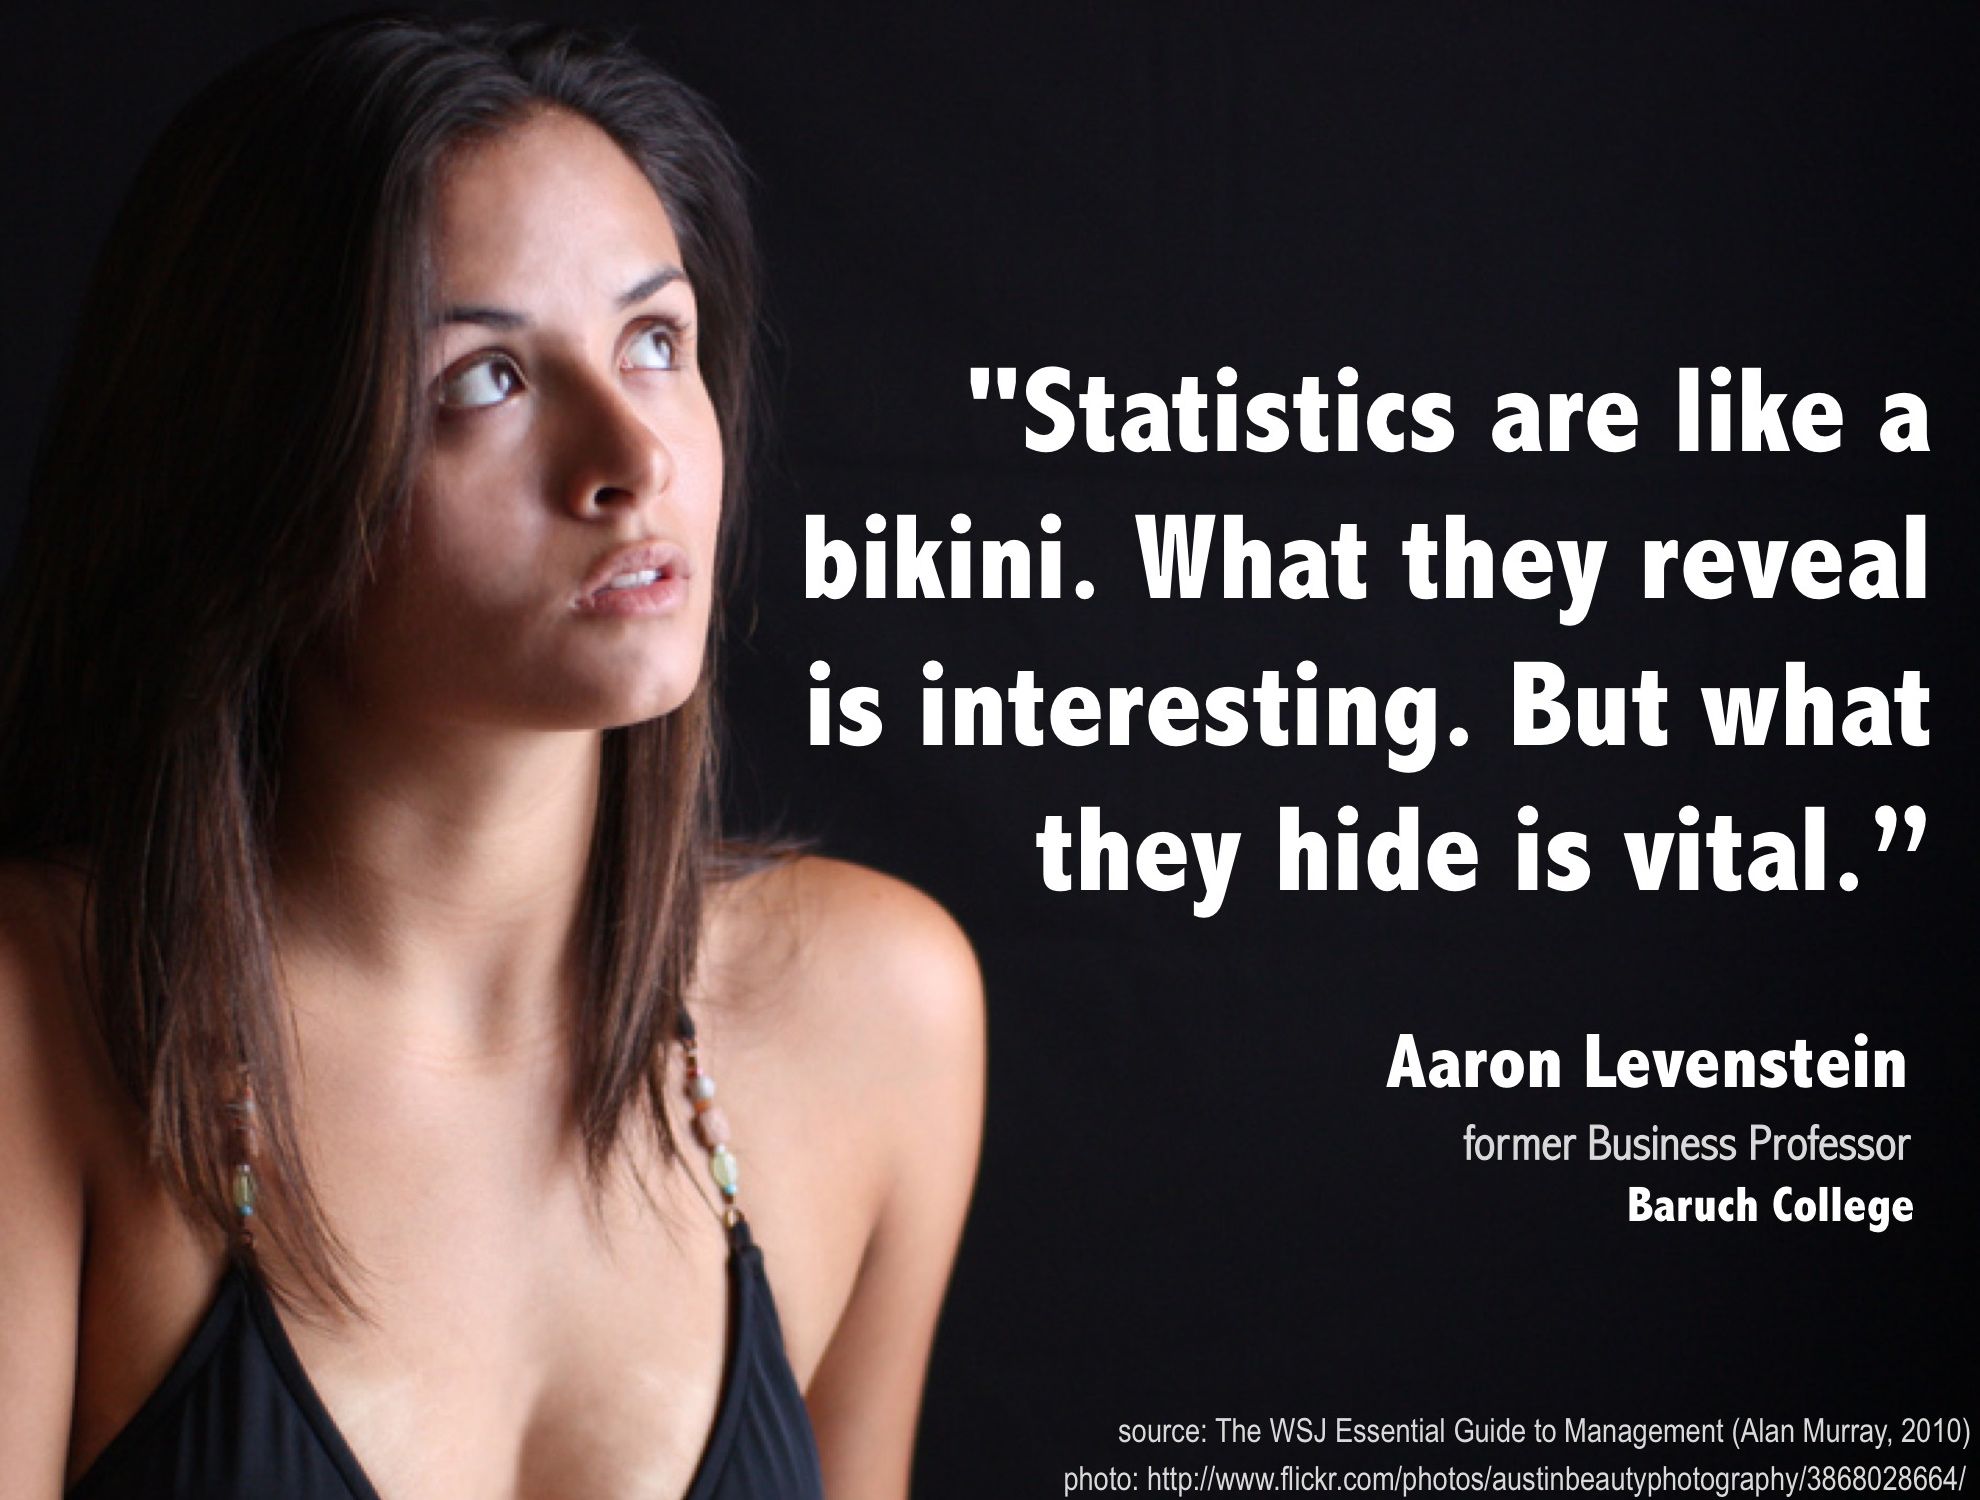 Statistics are like a bikini. What they reveal is interesting. But what they hide is vital. - Aaron Levenstein